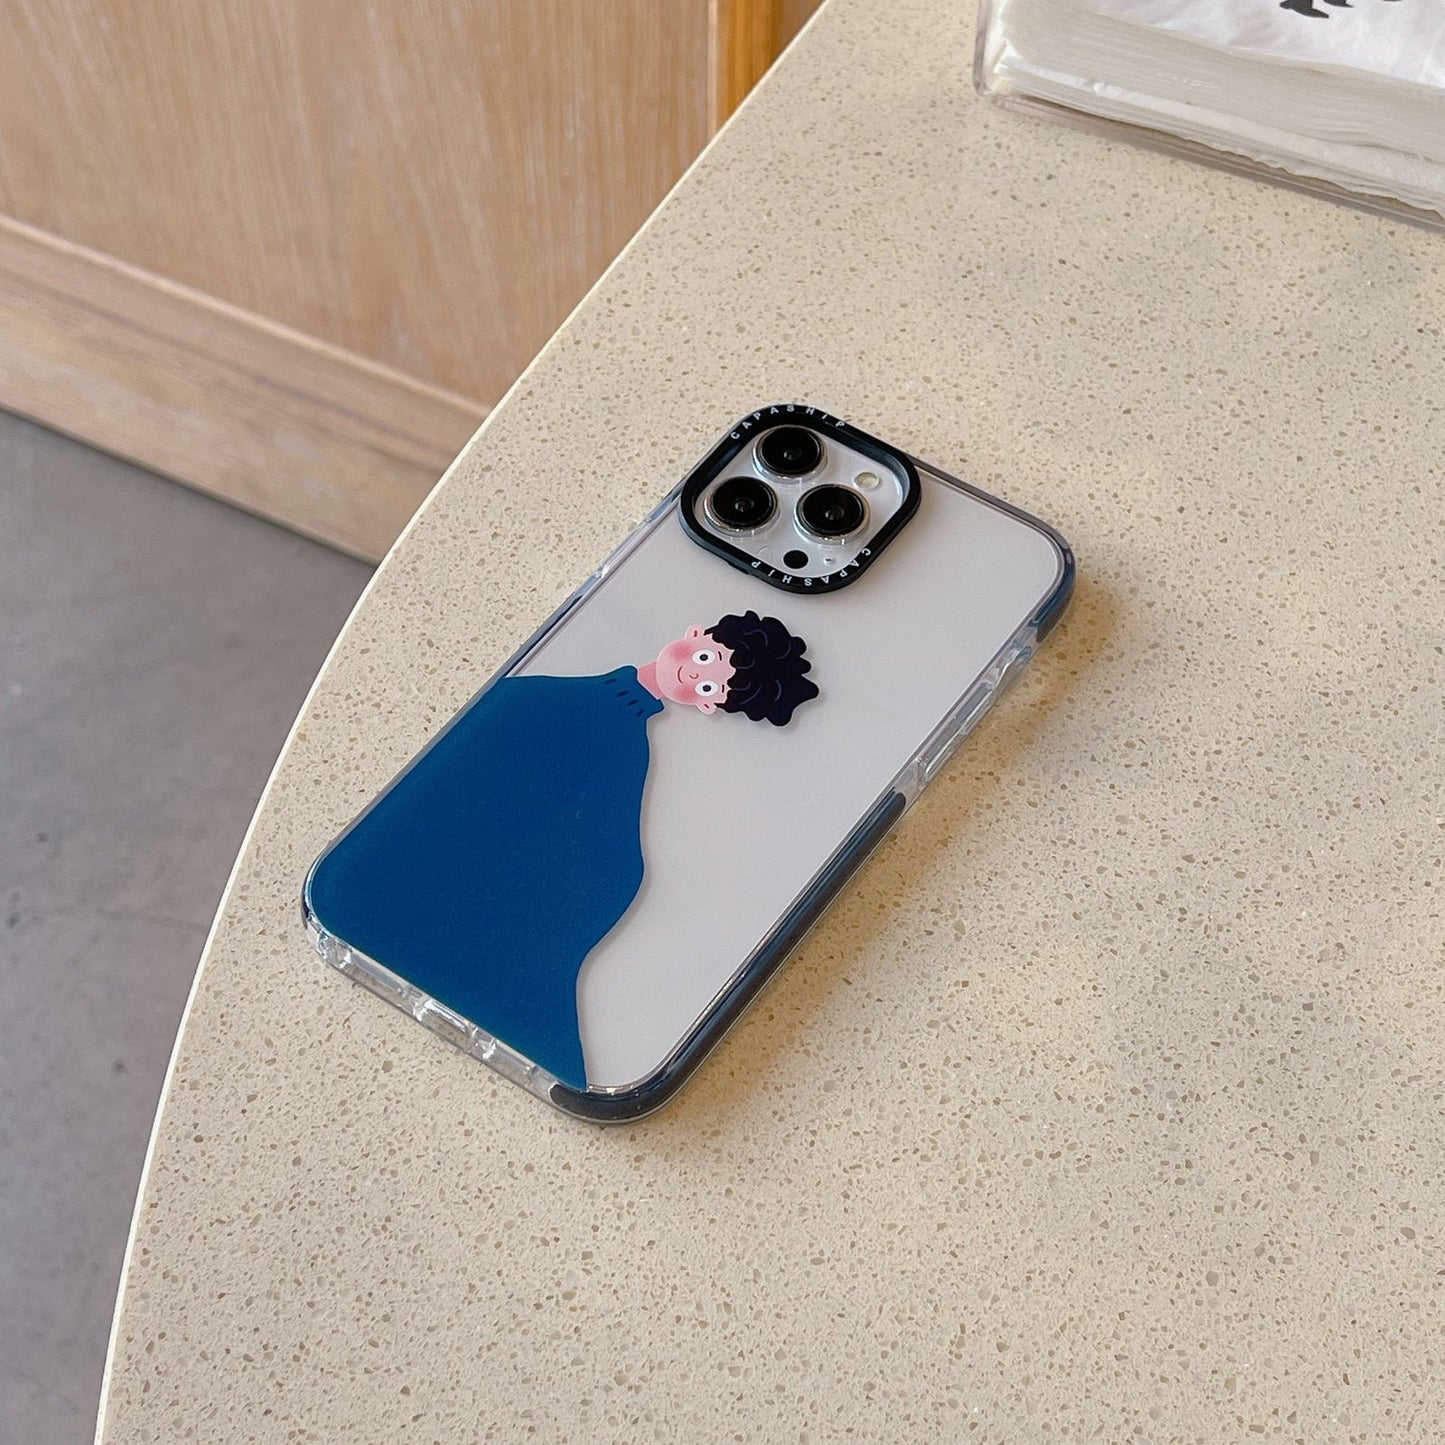 Sweater phone case for iPhone